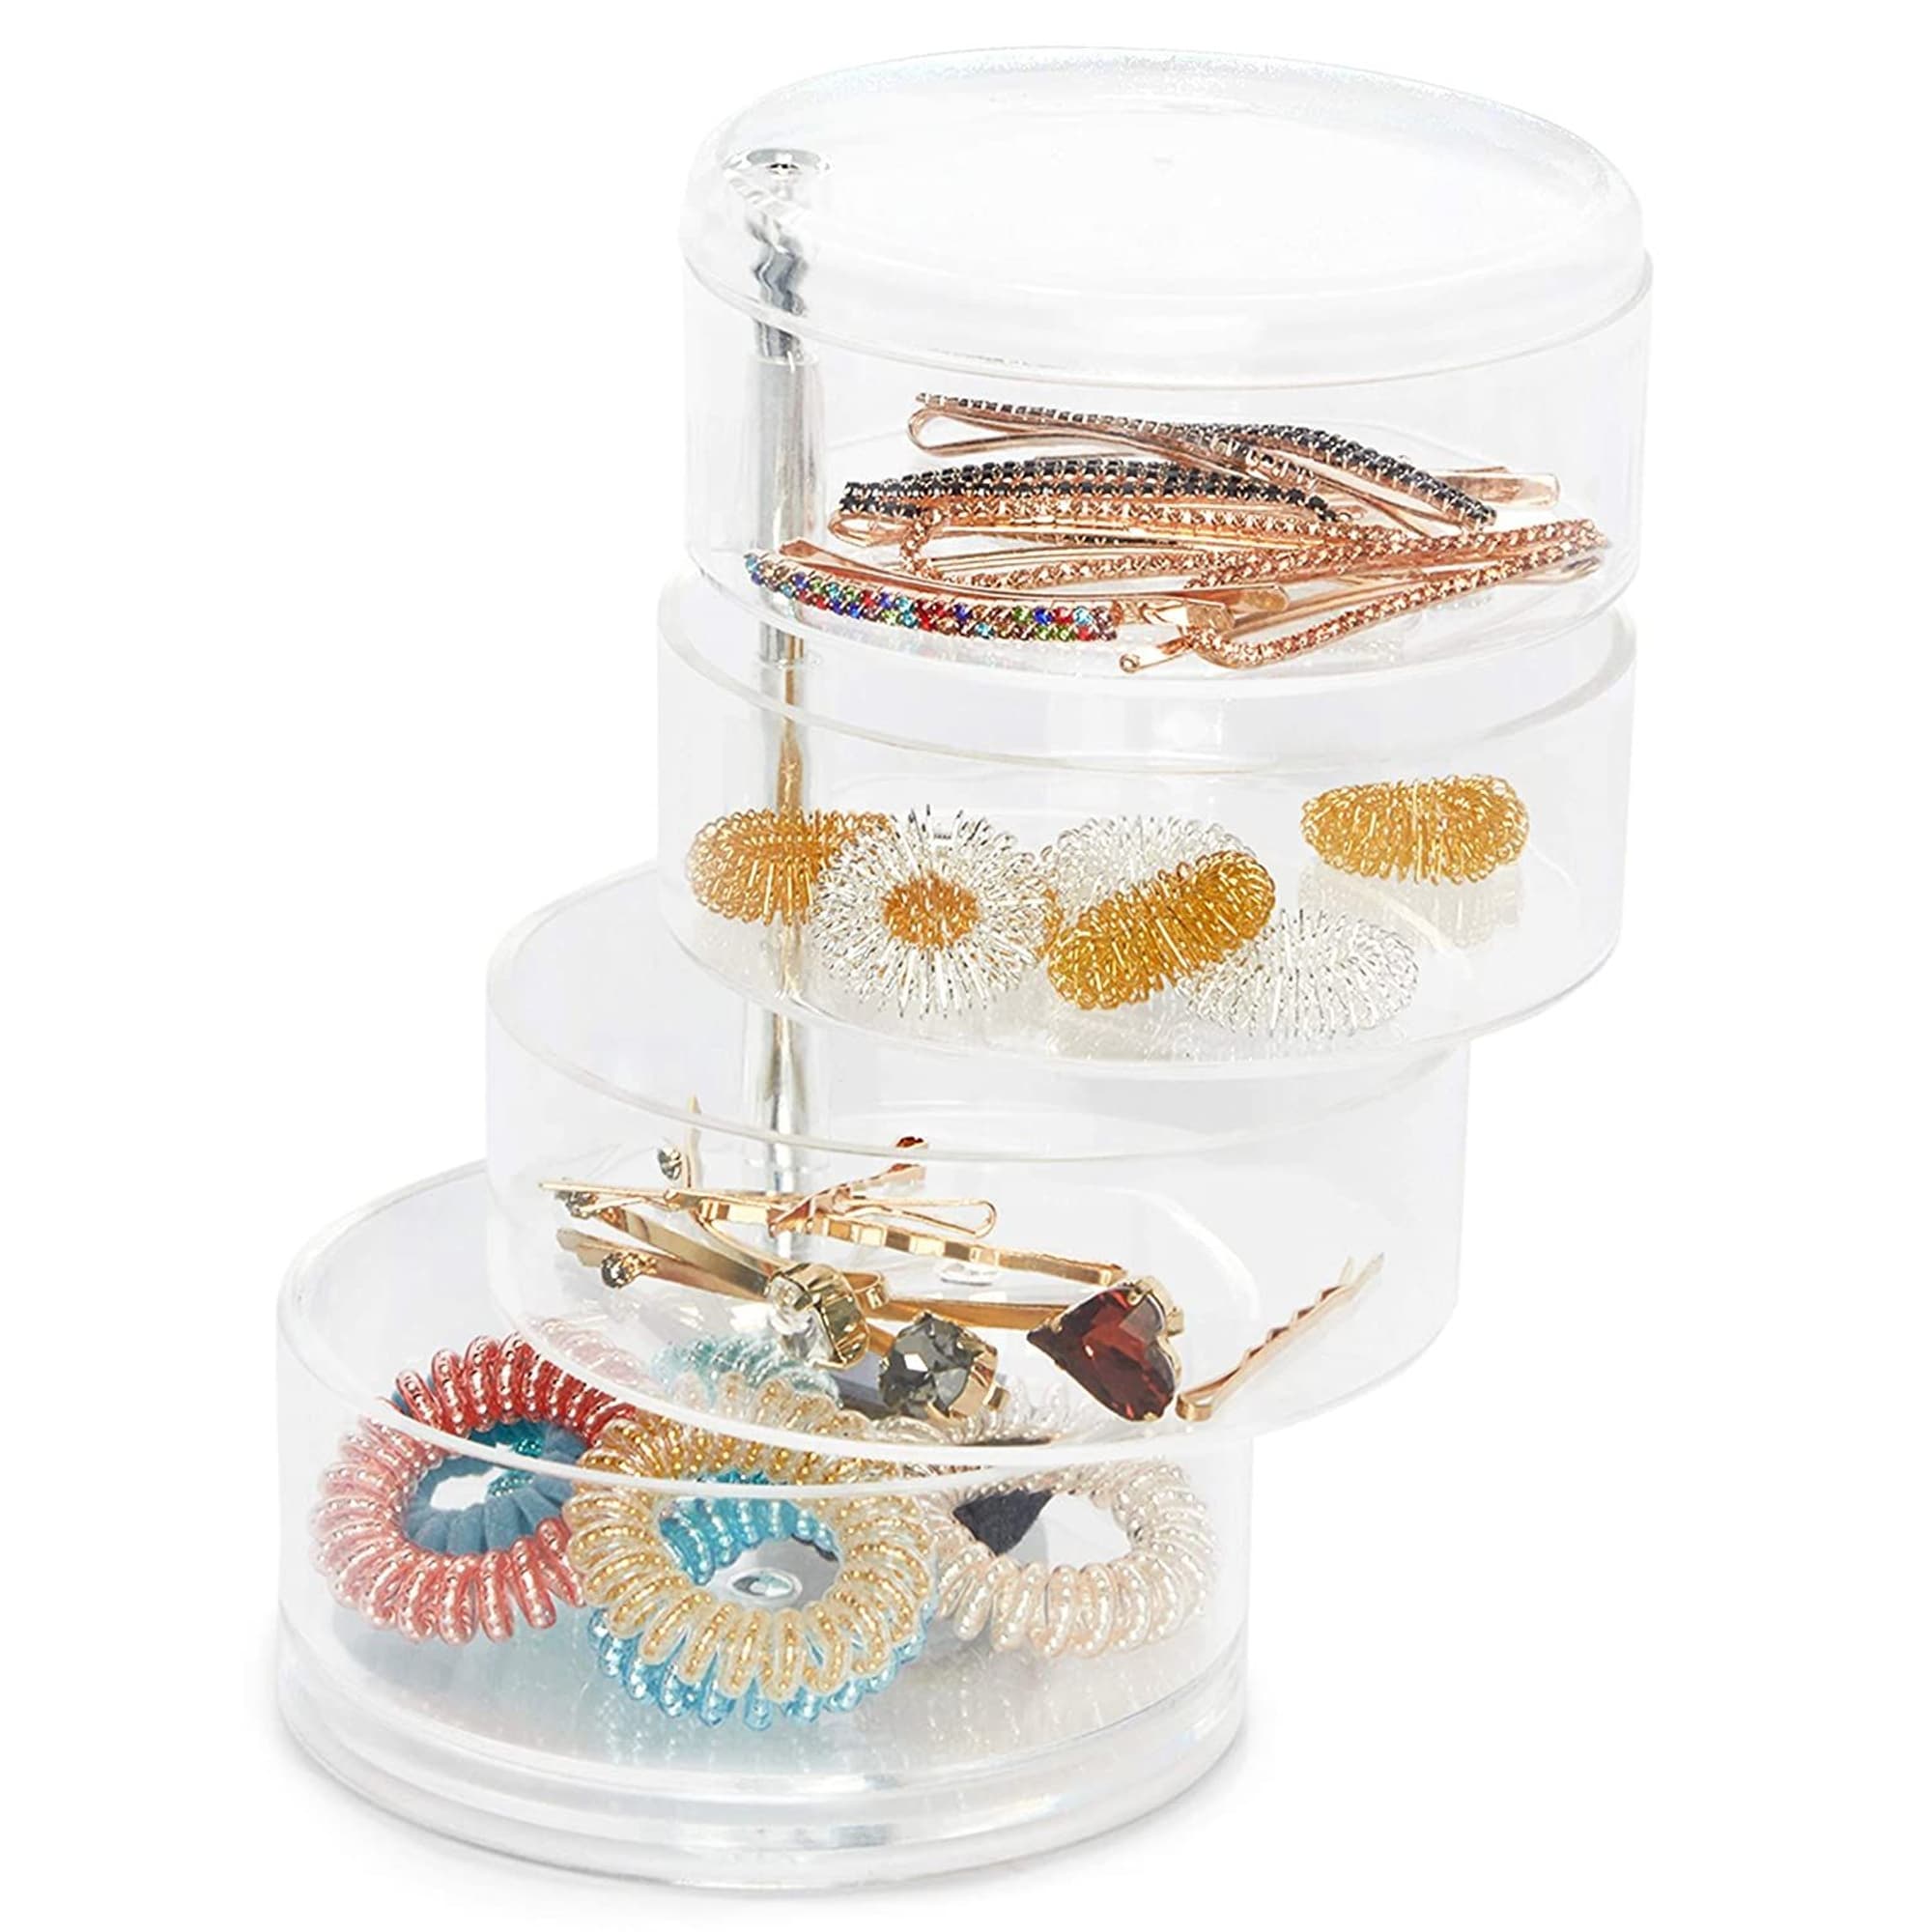 Plastic Jewelry Organizer, Hair Tie Container for Bathroom (4.5 x